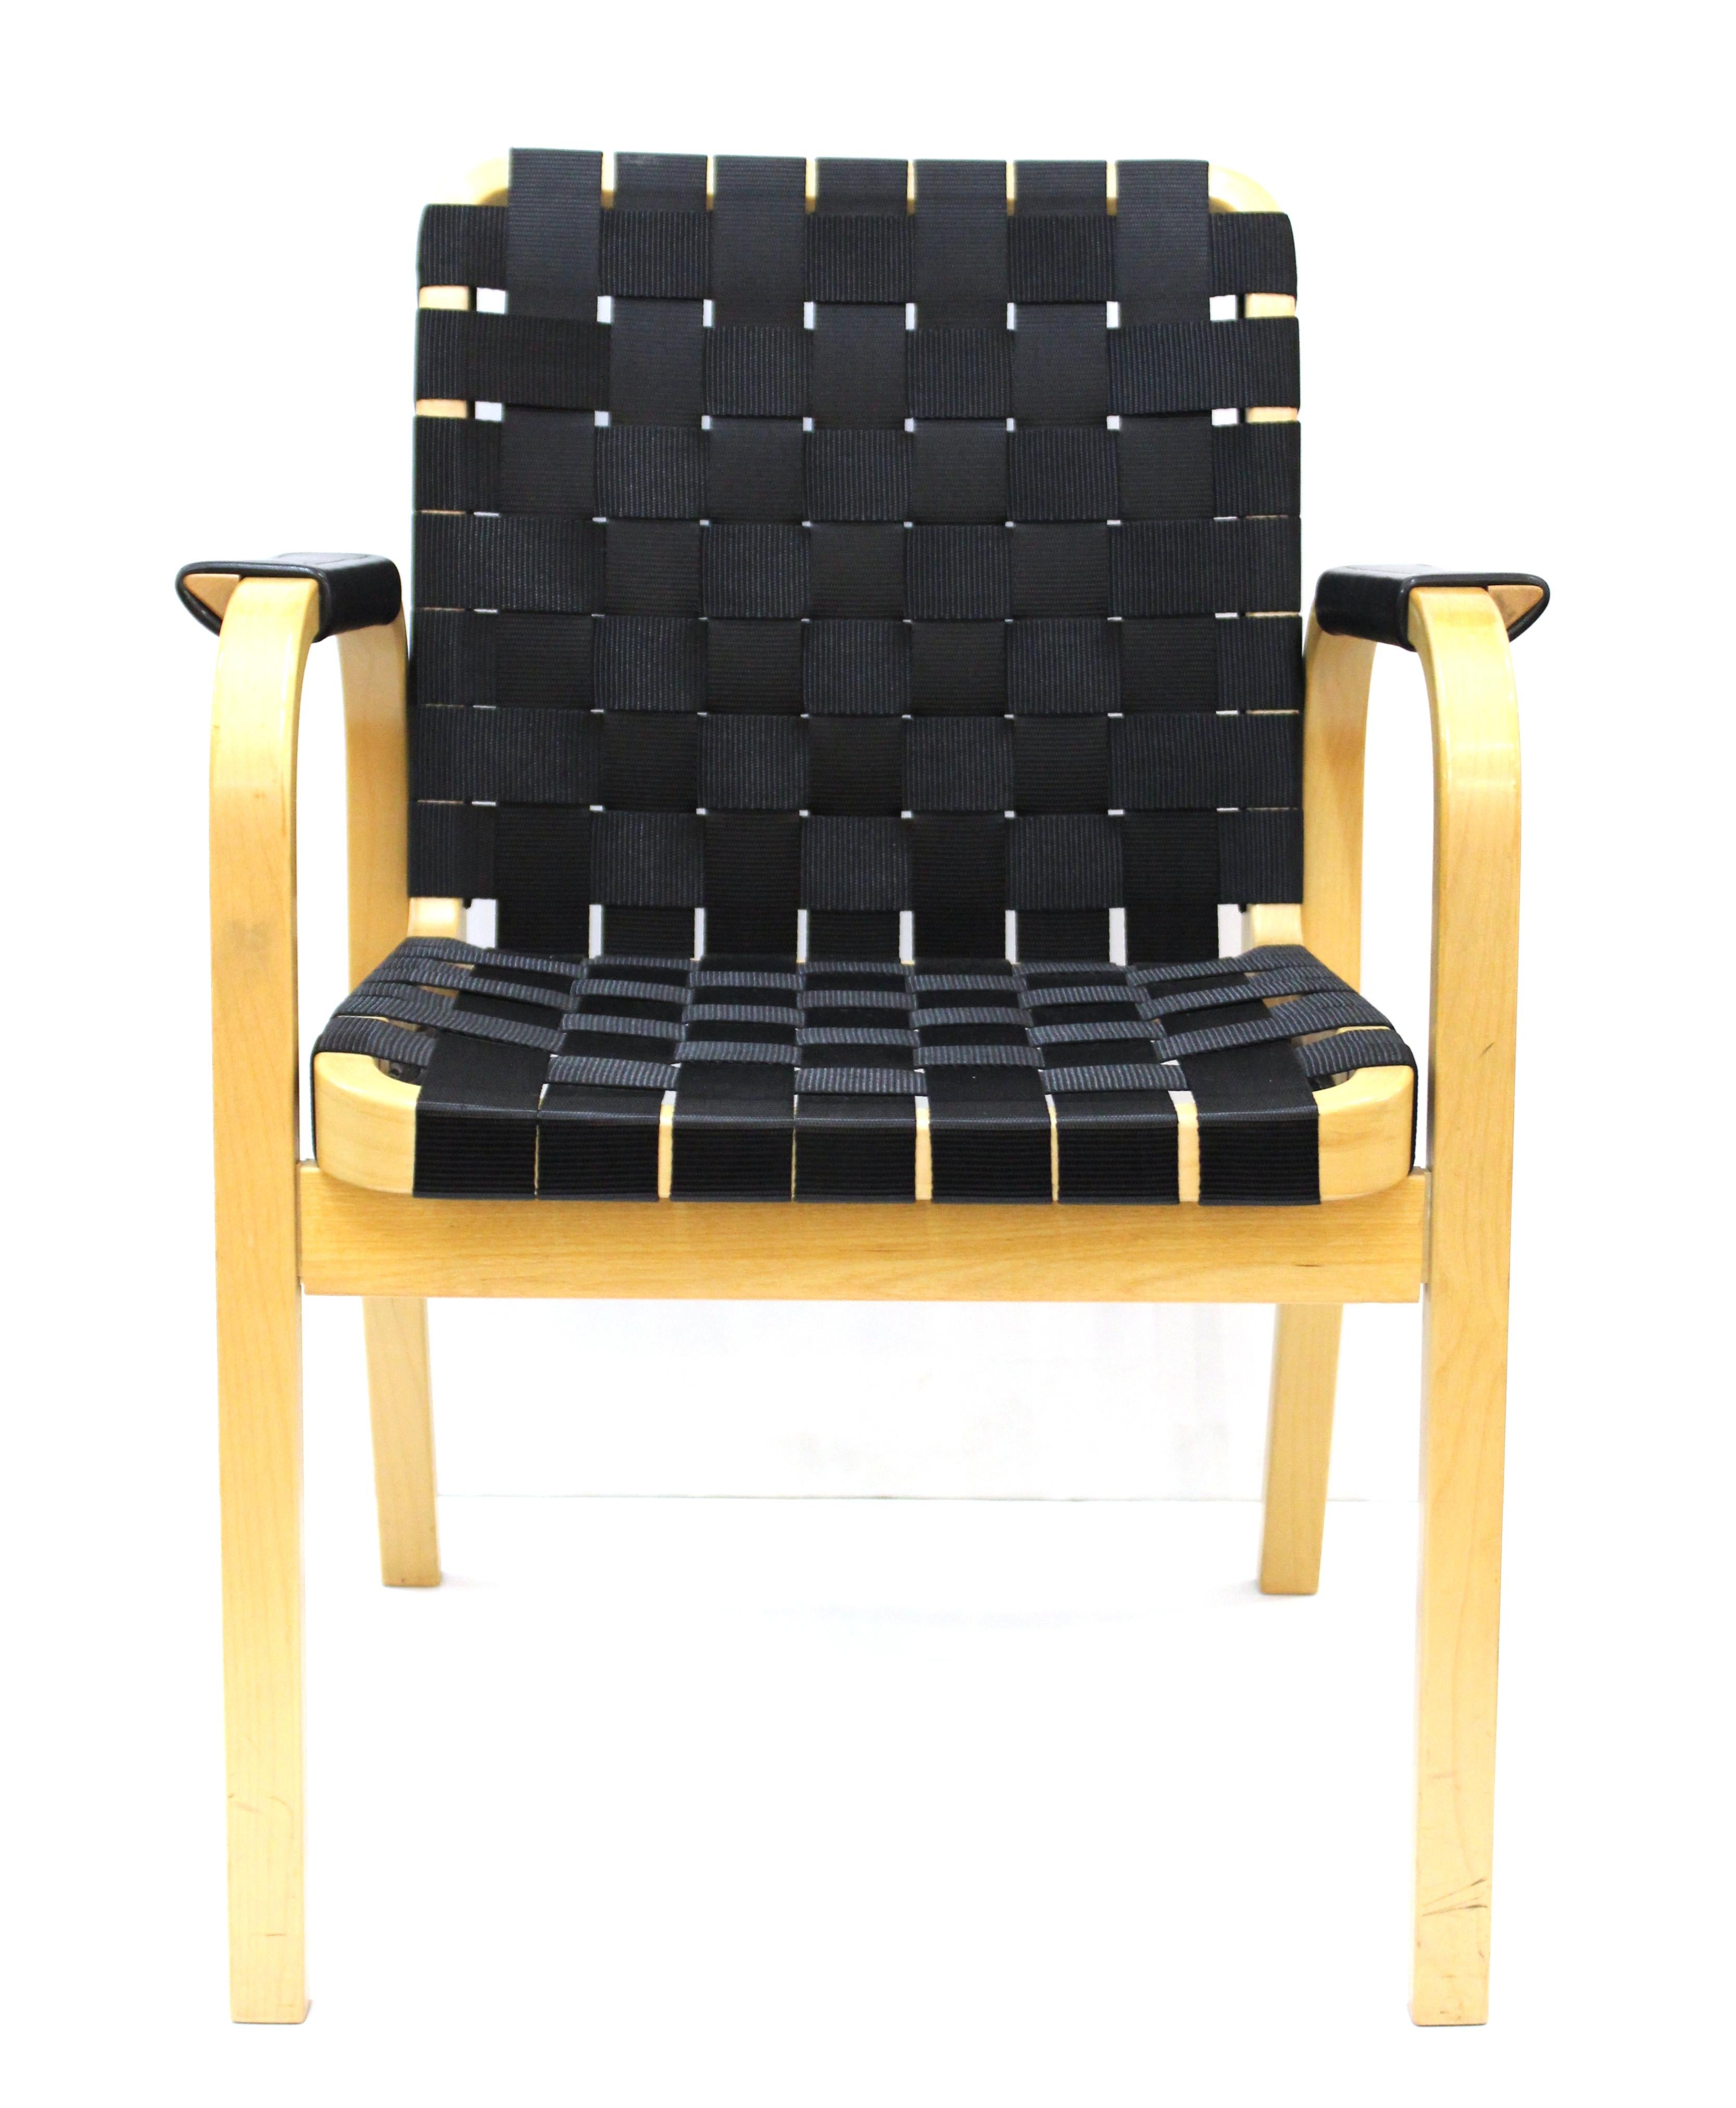 Scandinavian Mid-Century Modern 'Model 45' armchair in bent birchwood, designed by Alvar Aalto for Artek in the mid-20th century in Finland. The piece is in great vintage condition with age-appropriate wear.